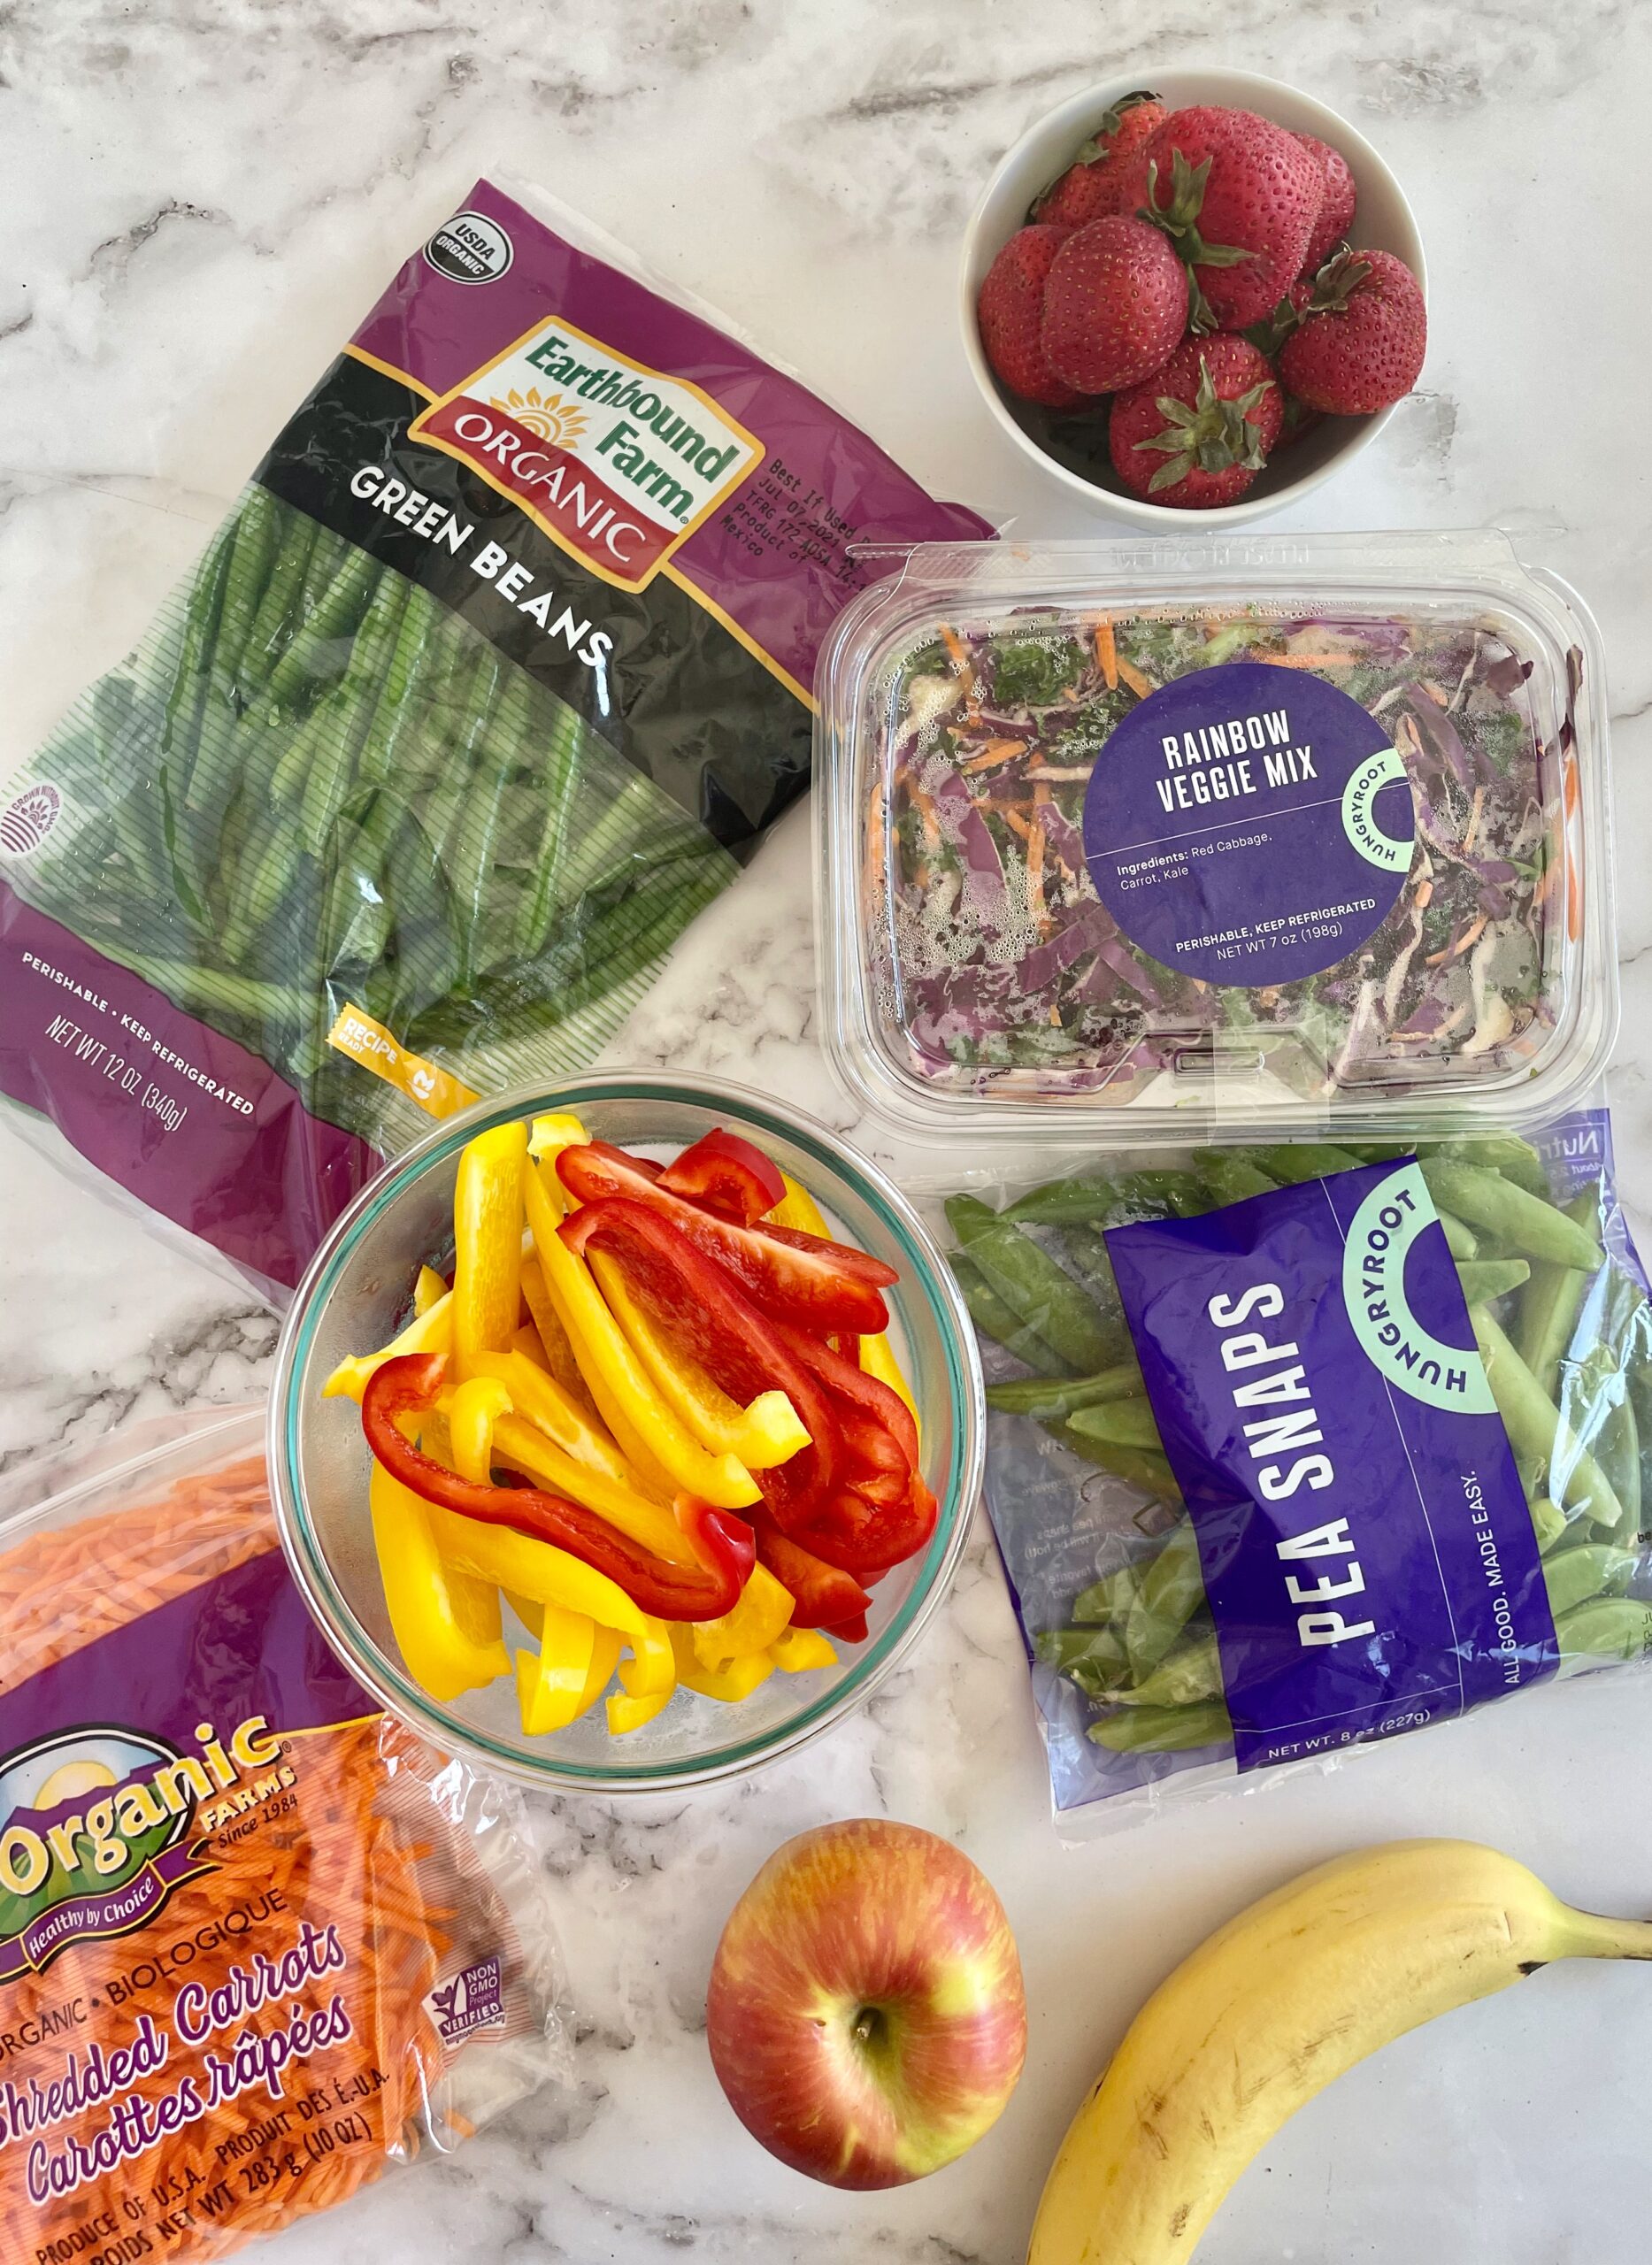 Healthy Grocery Haul + 20 Recipes to Try - Cheerful Choices